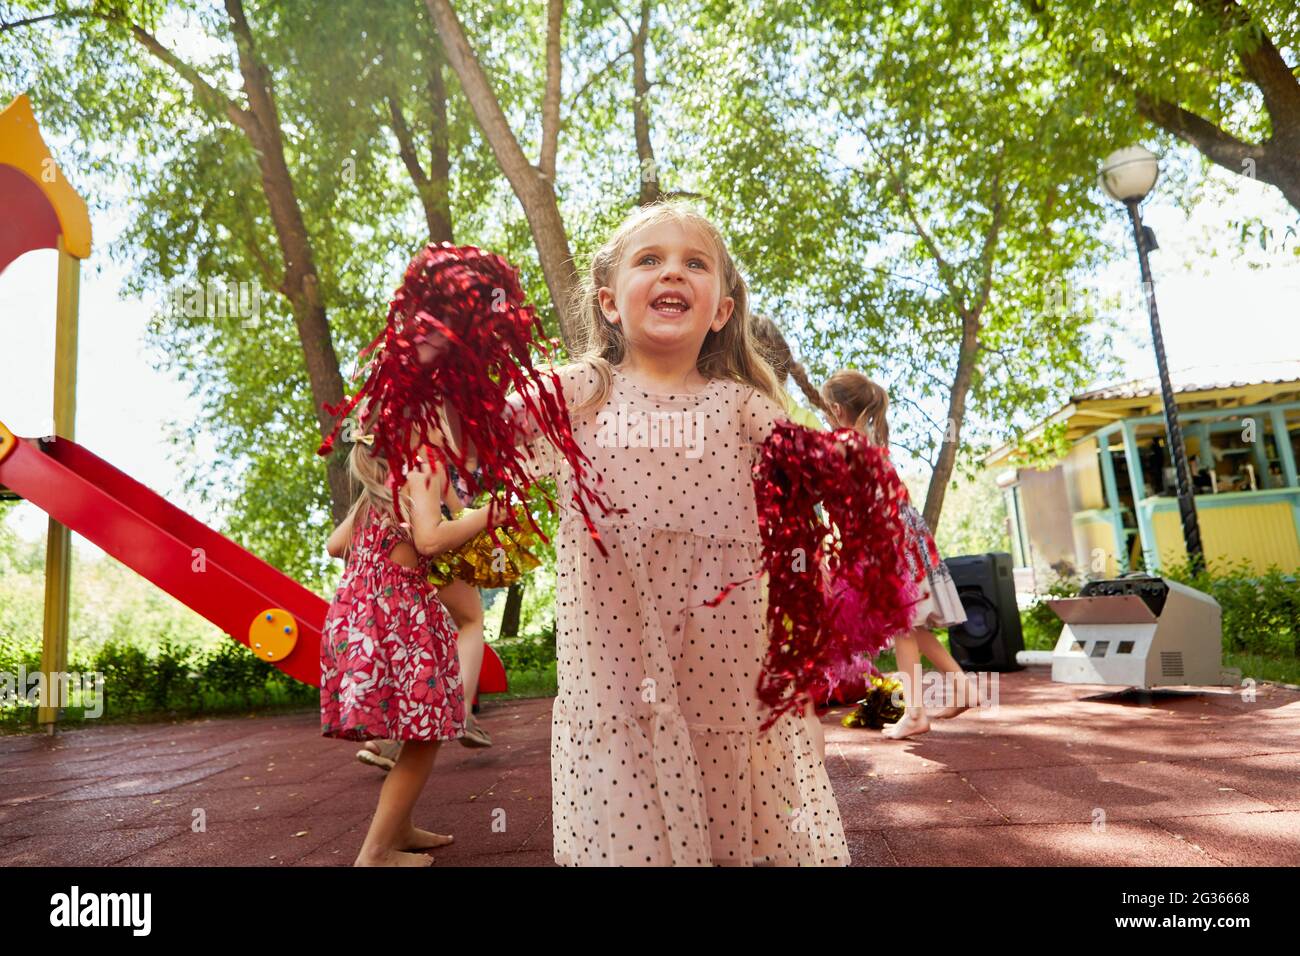 Low angle of cheerful little girl with pom poms playing on playground in summer Stock Photo